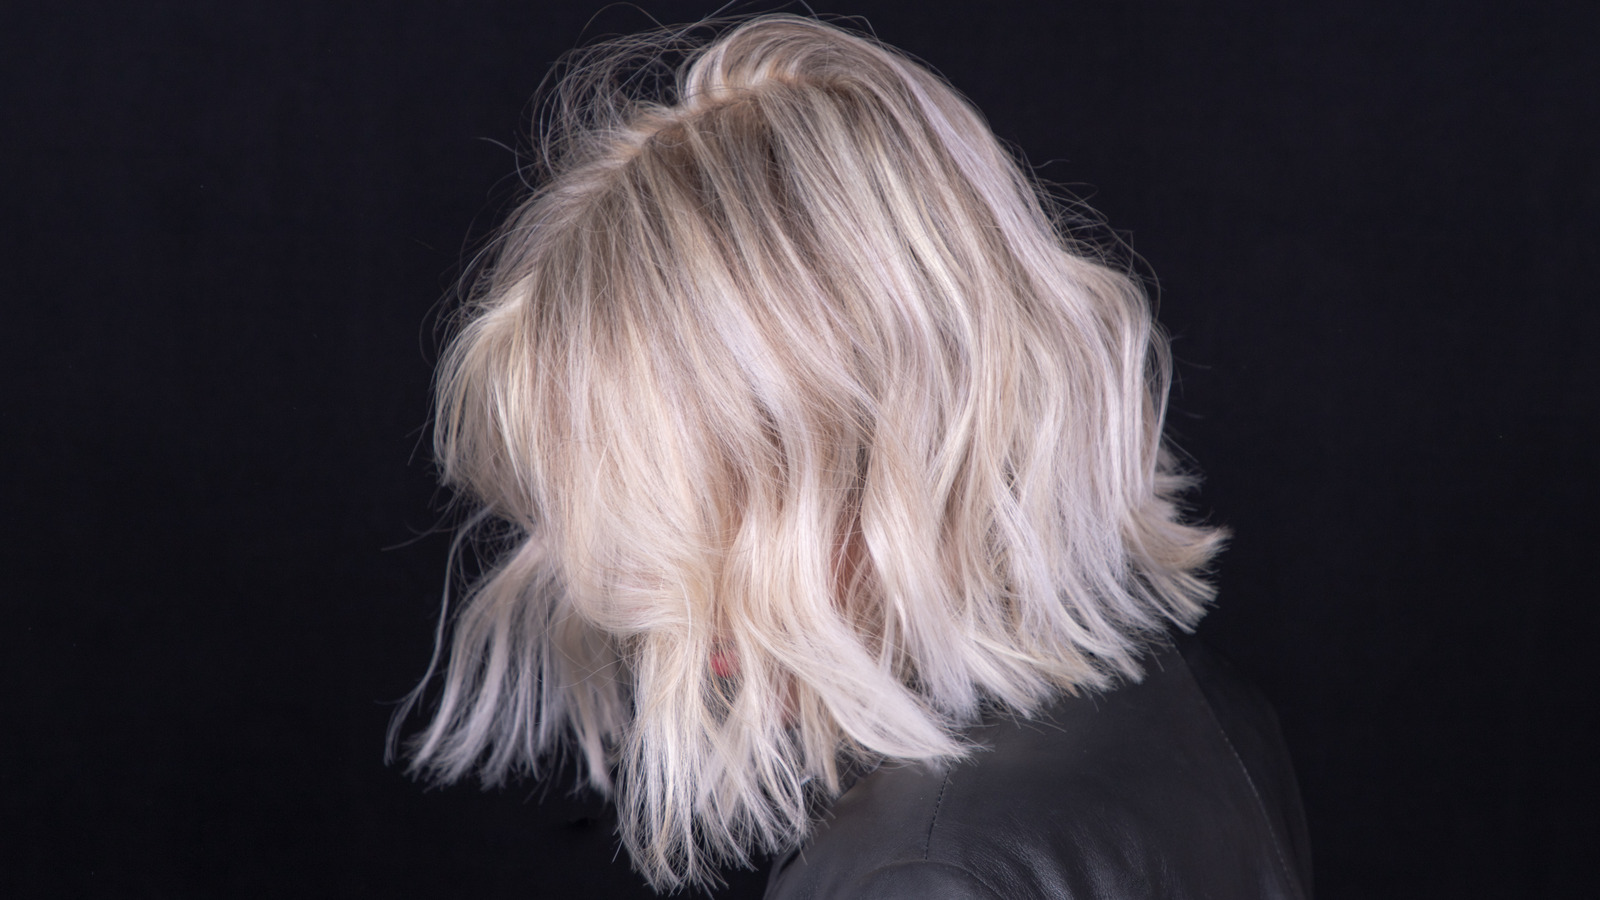 How To Pull Off The Trendy Shaggy Bob